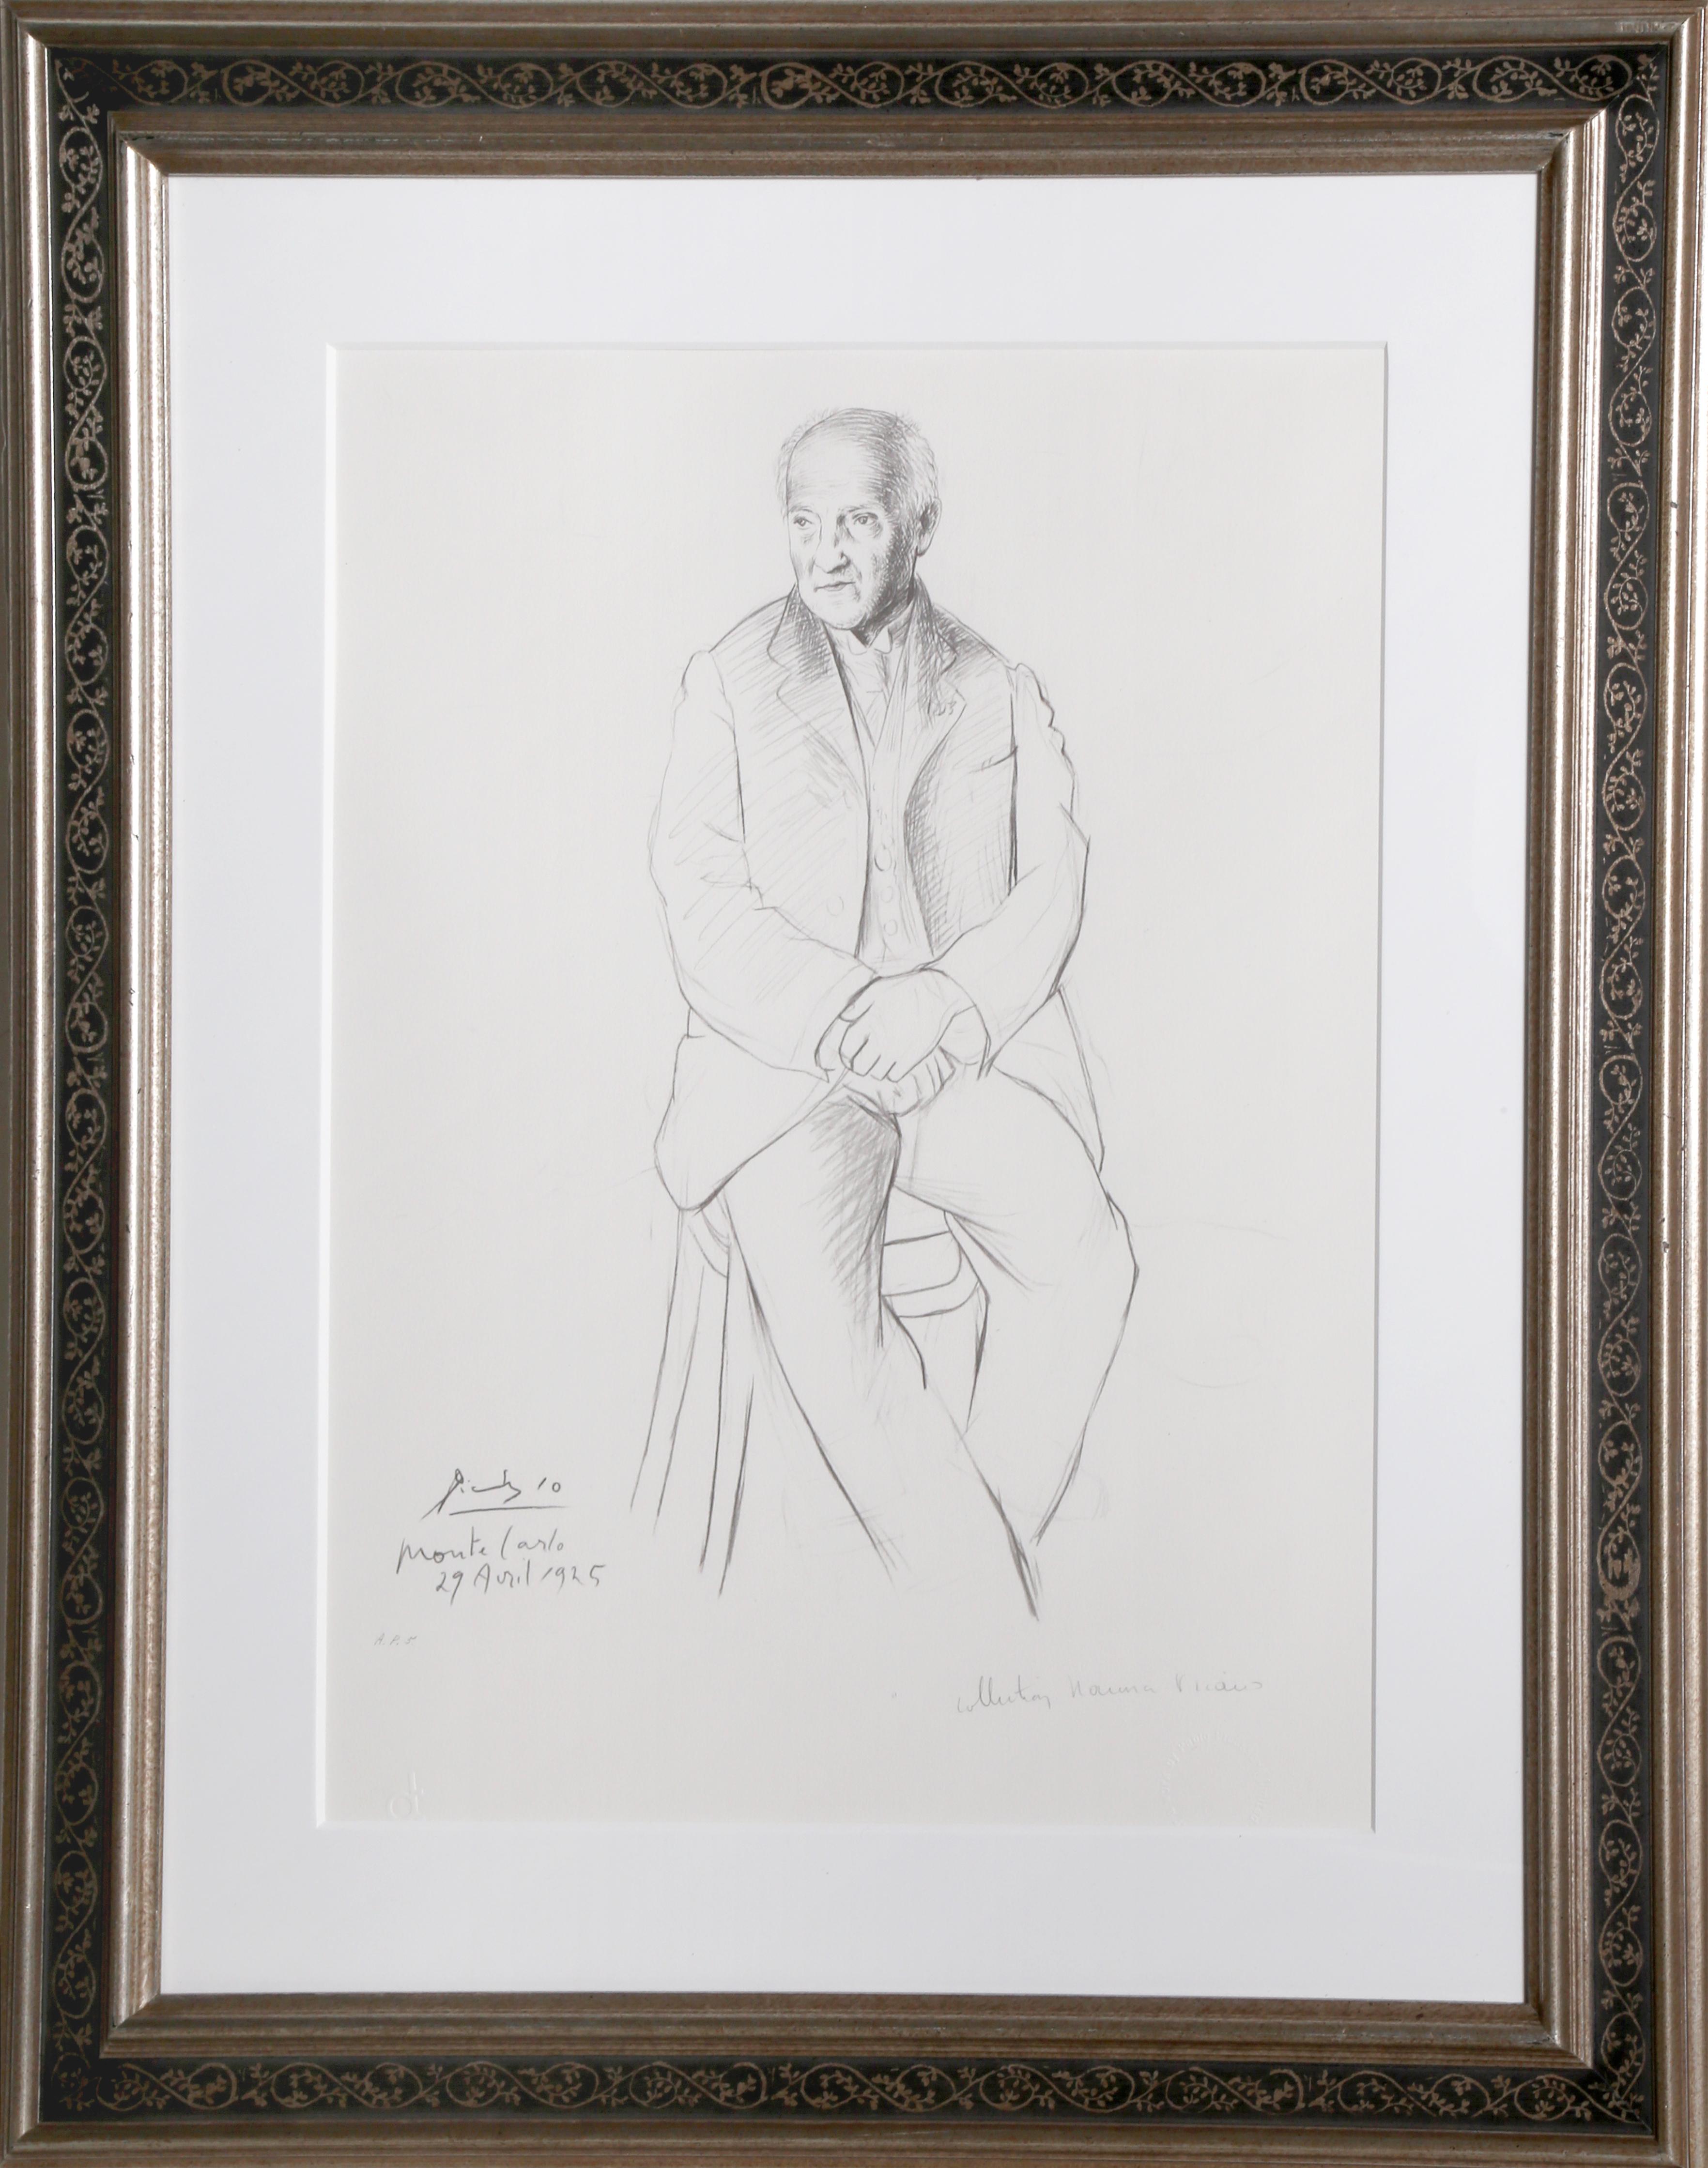 A lithograph from the Marina Picasso Estate Collection after the Pablo Picasso painting "Portrait du Maitre de Ballet de la Scala de Milan".  The original painting was completed in 1925. In the 1970's after Picasso's death, Marina Picasso, his